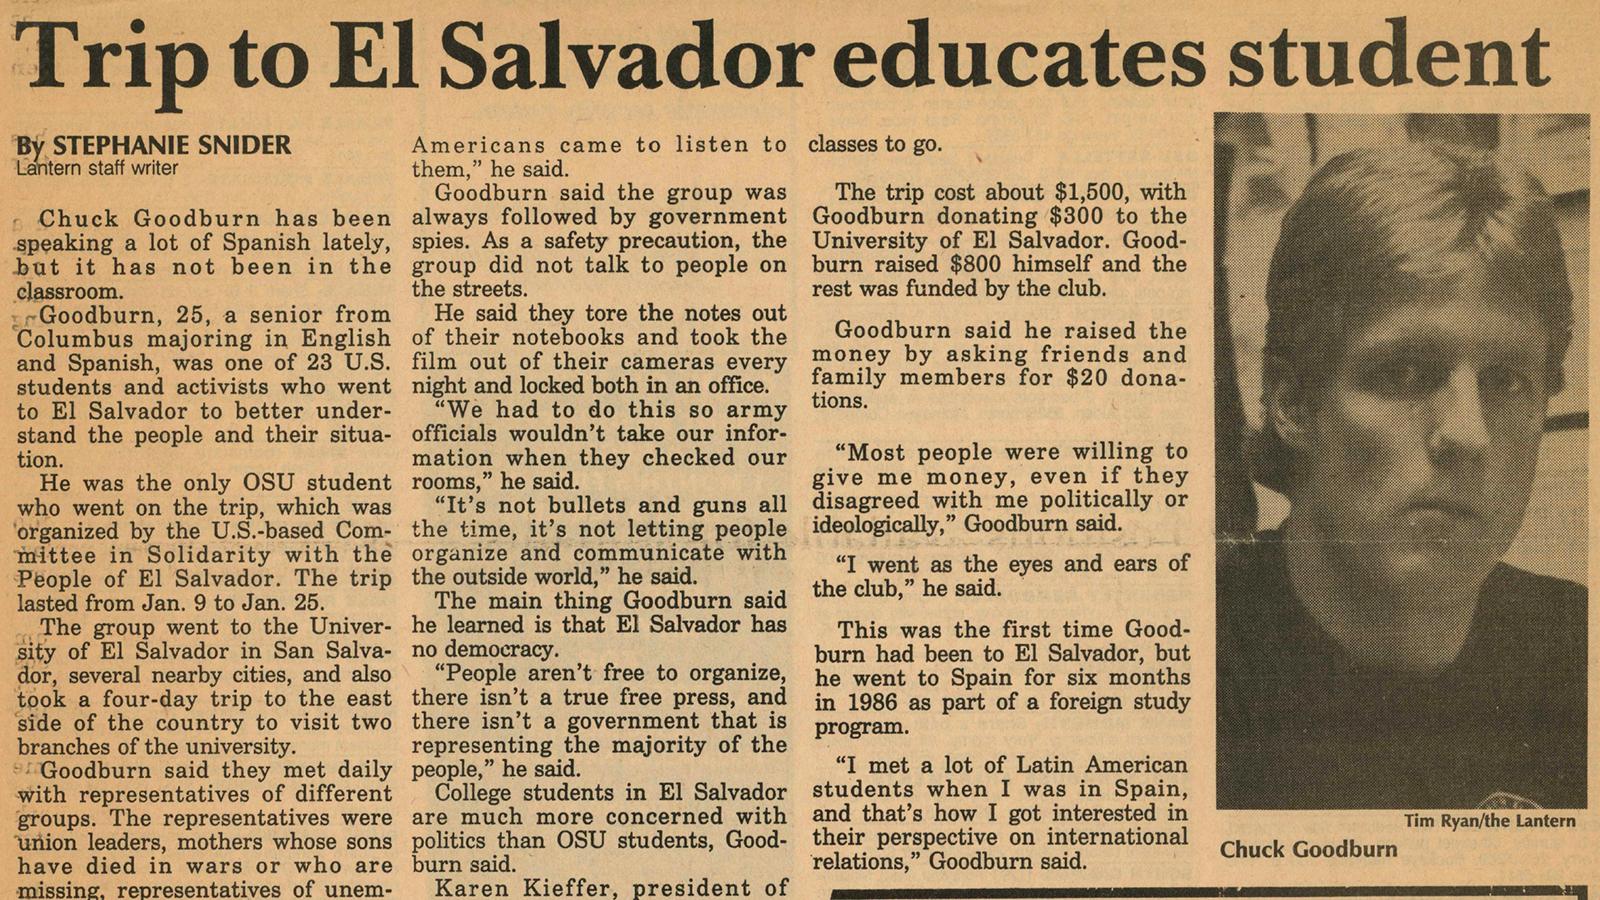 Newspaper clipping about Goodburn's trip to El Salvador